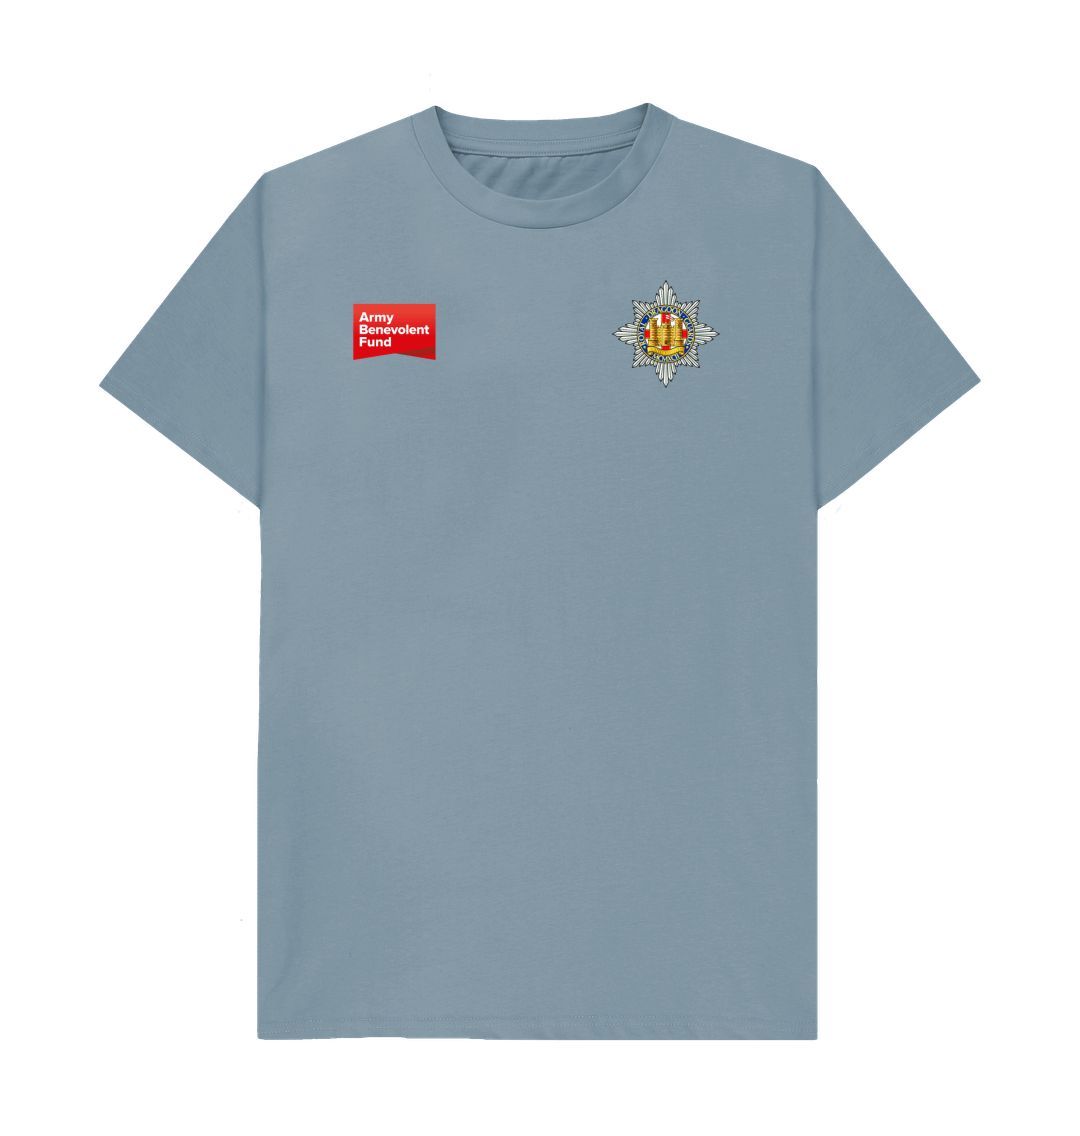 The Royal Dragoon Guards Unisex T-shirt - Army Benevolent Fund